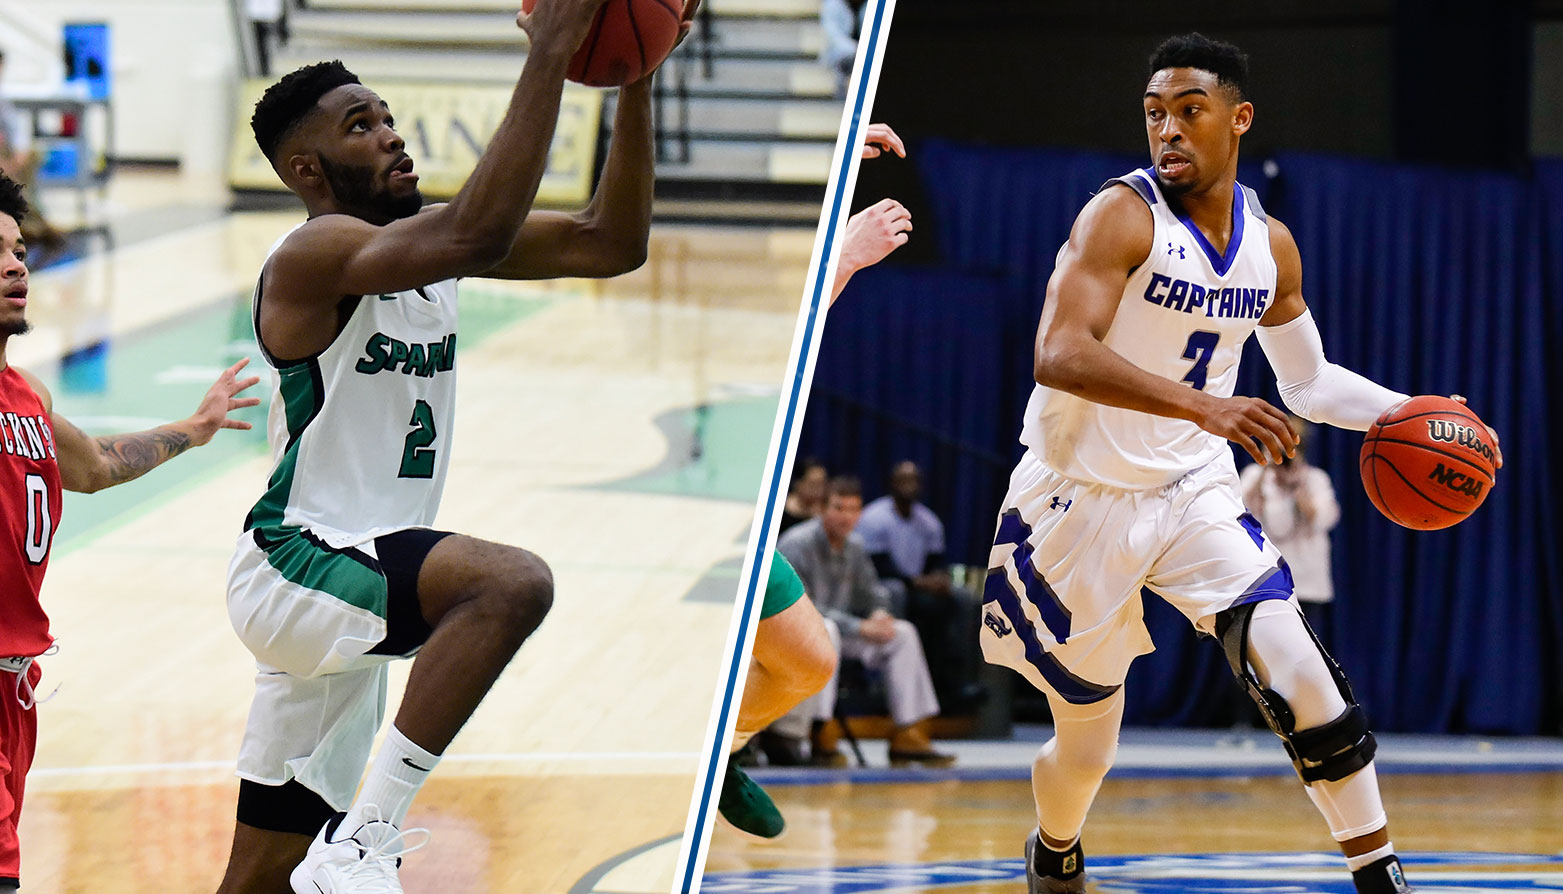 Christopher Newport's Carter & York's Bady Collect NABC All-America Honors